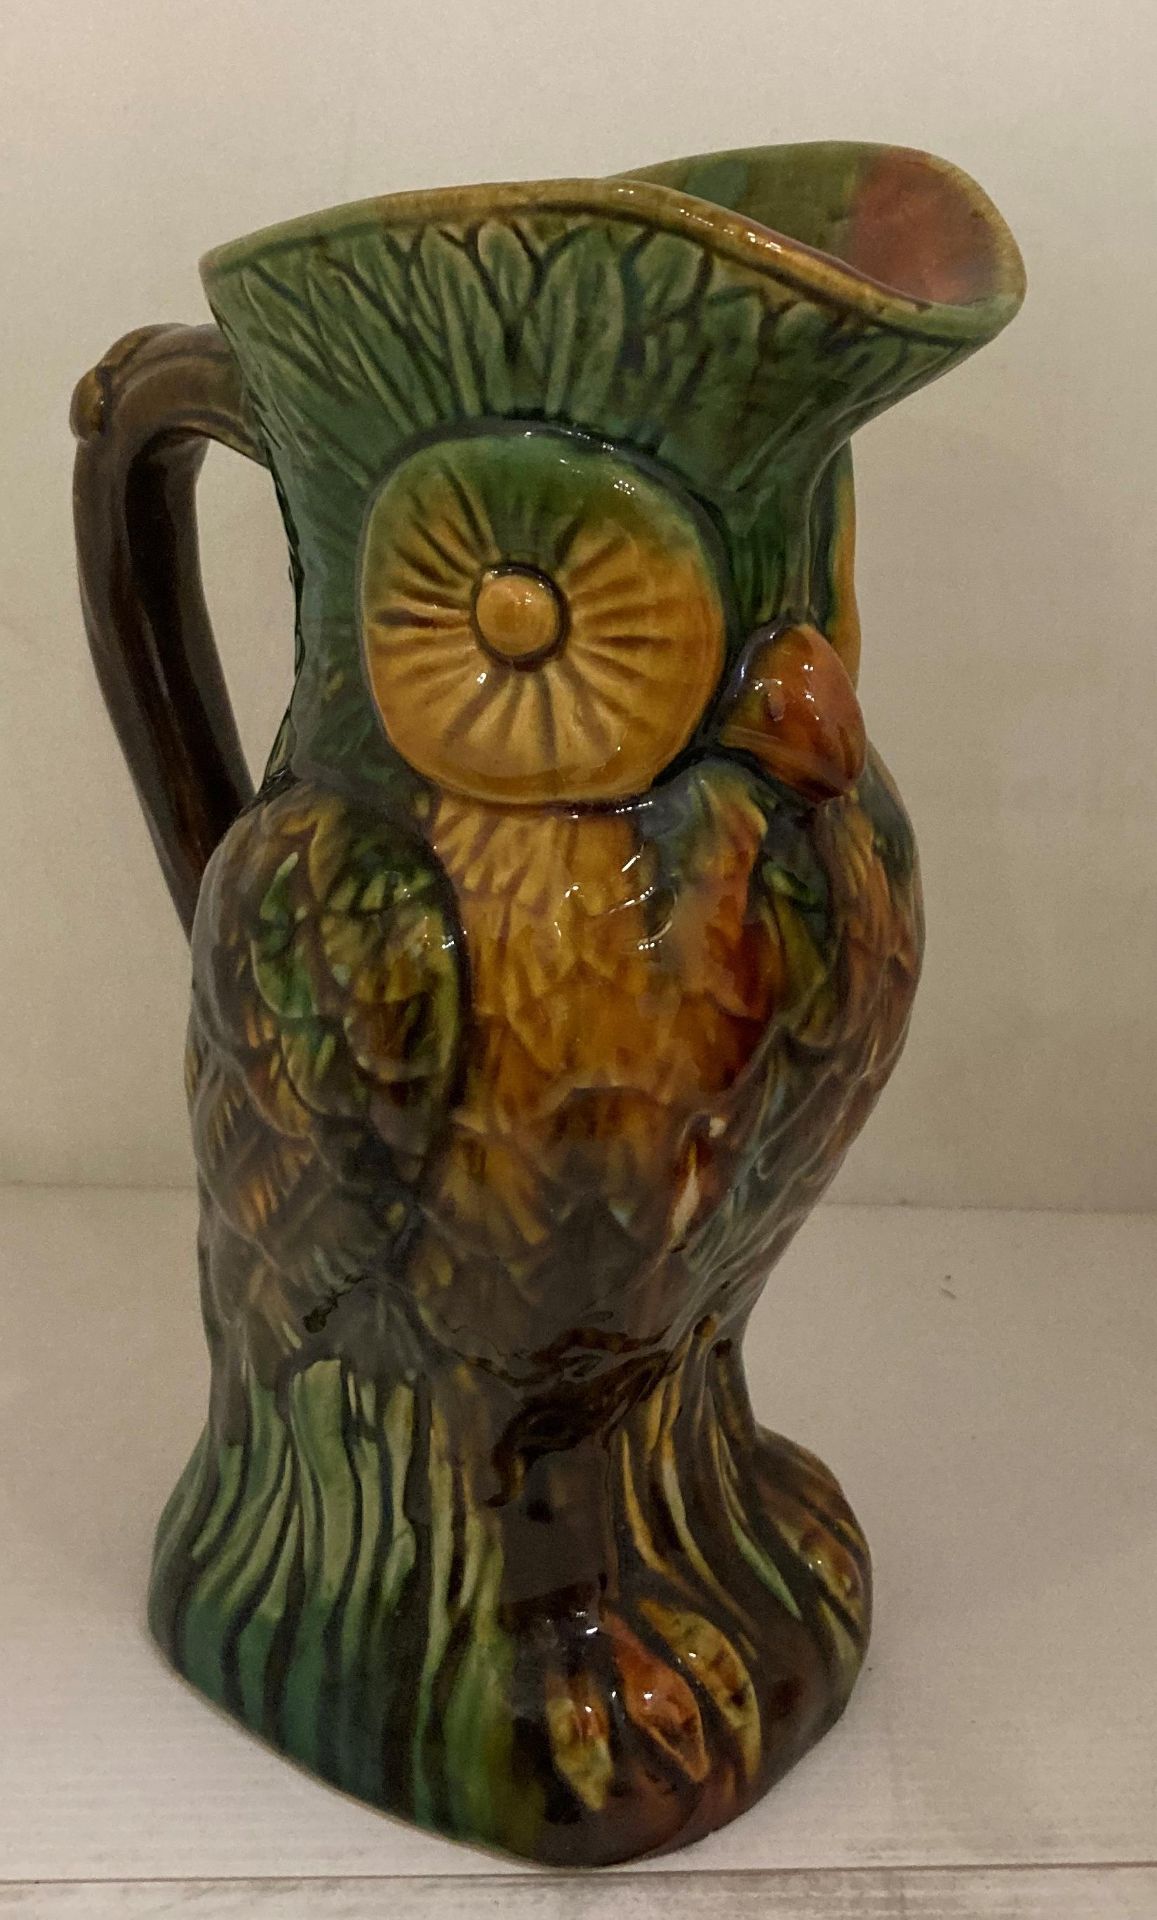 A Dartmouth Devon Plymouth Gin green glazed fish jug, frog and parrot jugs, etc. - Image 3 of 4